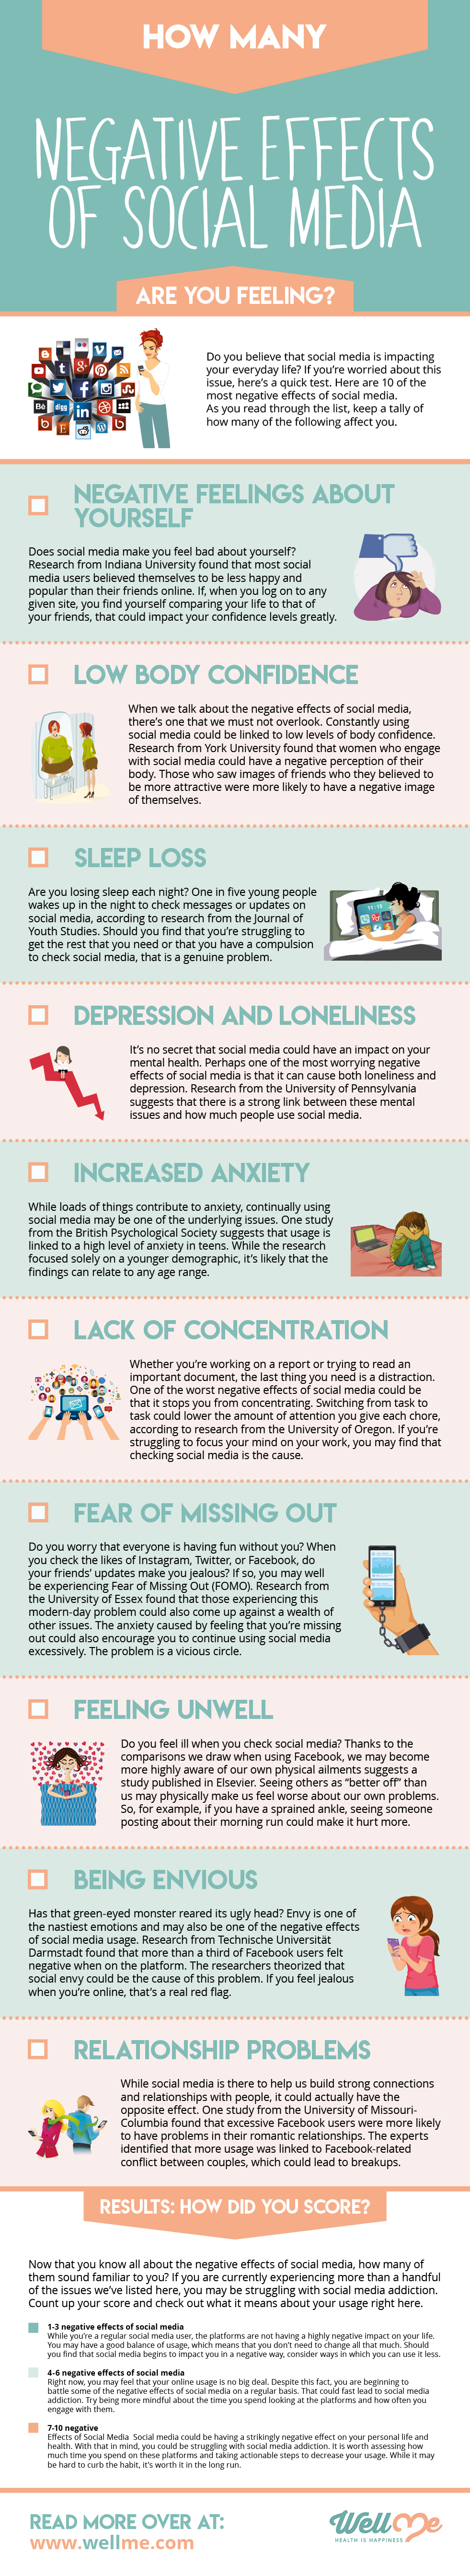 How Many Negative Effects of Social Media Are You Feeling? infographic